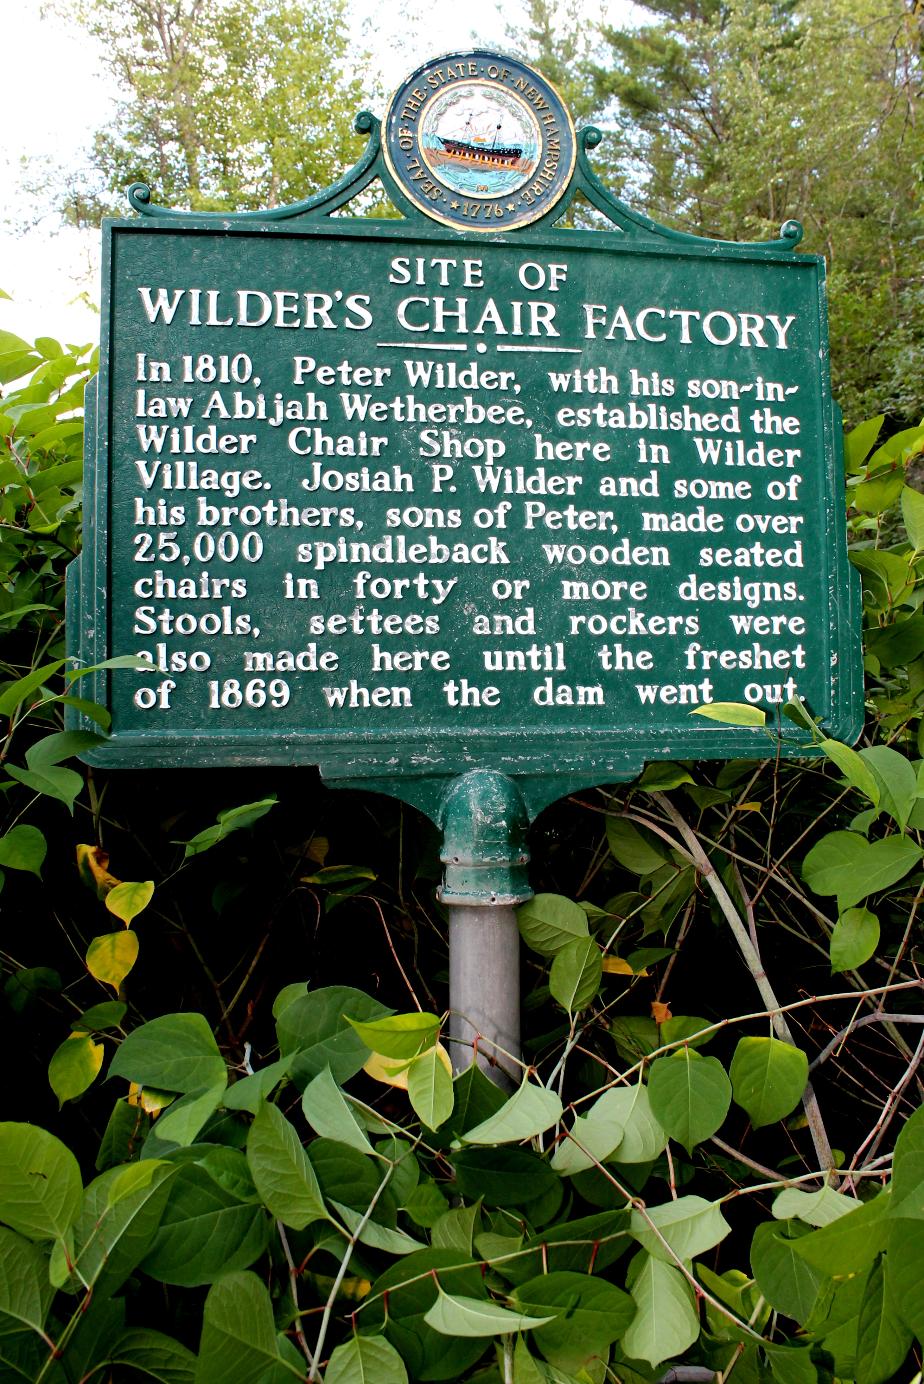 Wilders Chair Factory Historical Marker - New Ipswich New Hampshire